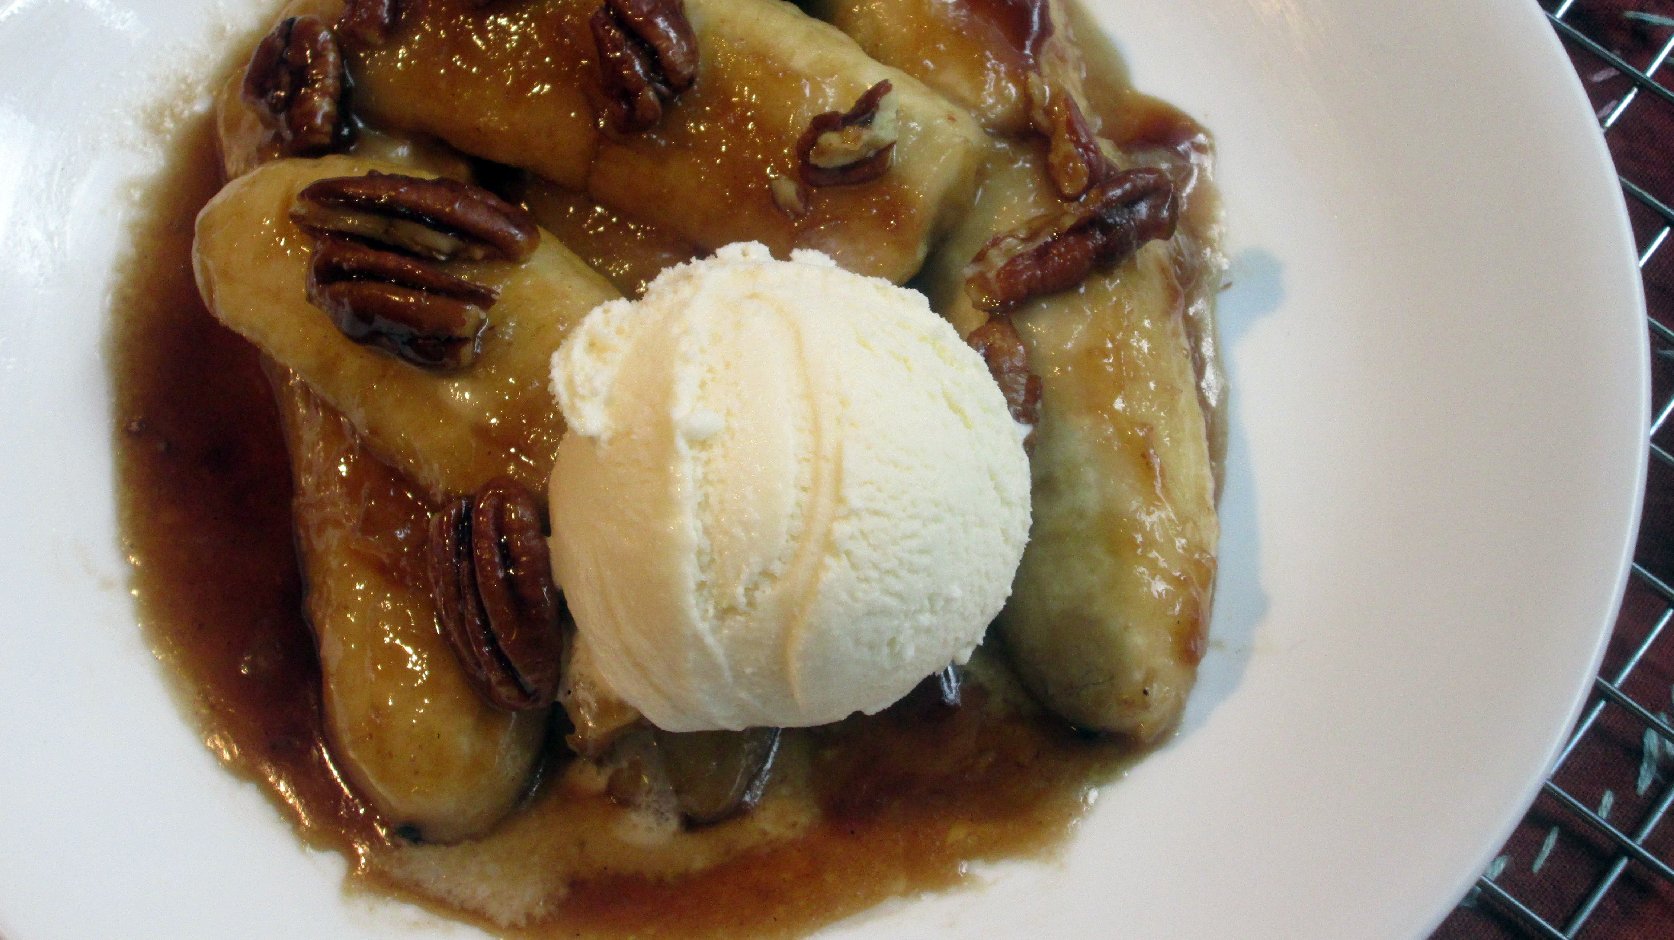 Caramelized Bananas With Nuts And Orange Liqueur. Photo: Laura B. Weiss/NPR